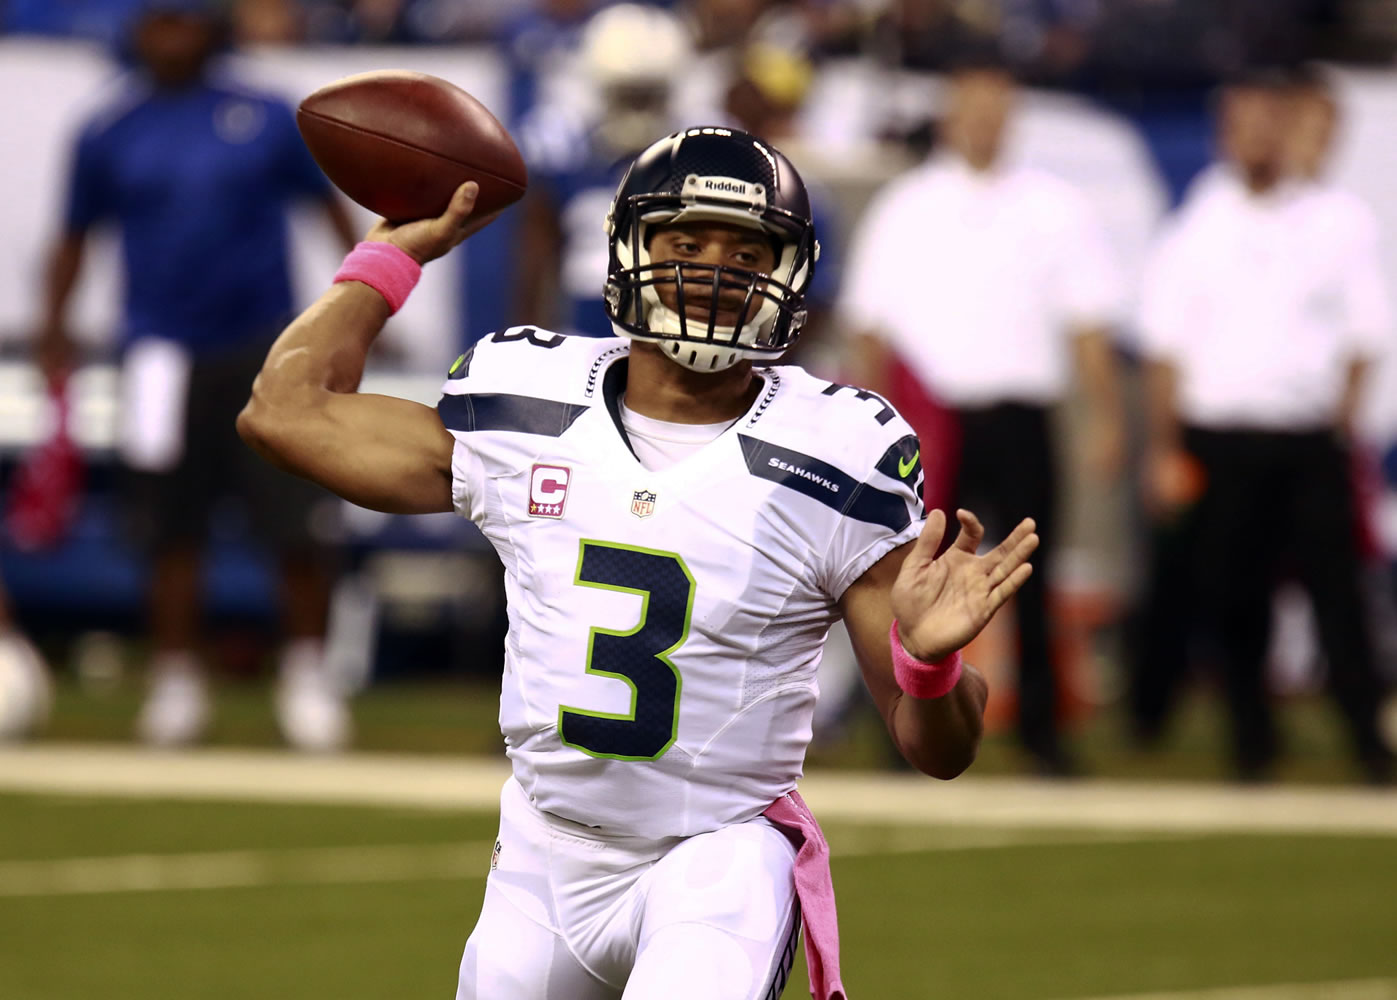 Seattle Seahawks quarterback Russell Wilson throws against the Indianapolis Colts during the first half of an NFL football game in Indianapolis, Sunday, Oct. 6, 2013. (AP Photo/Brent R.